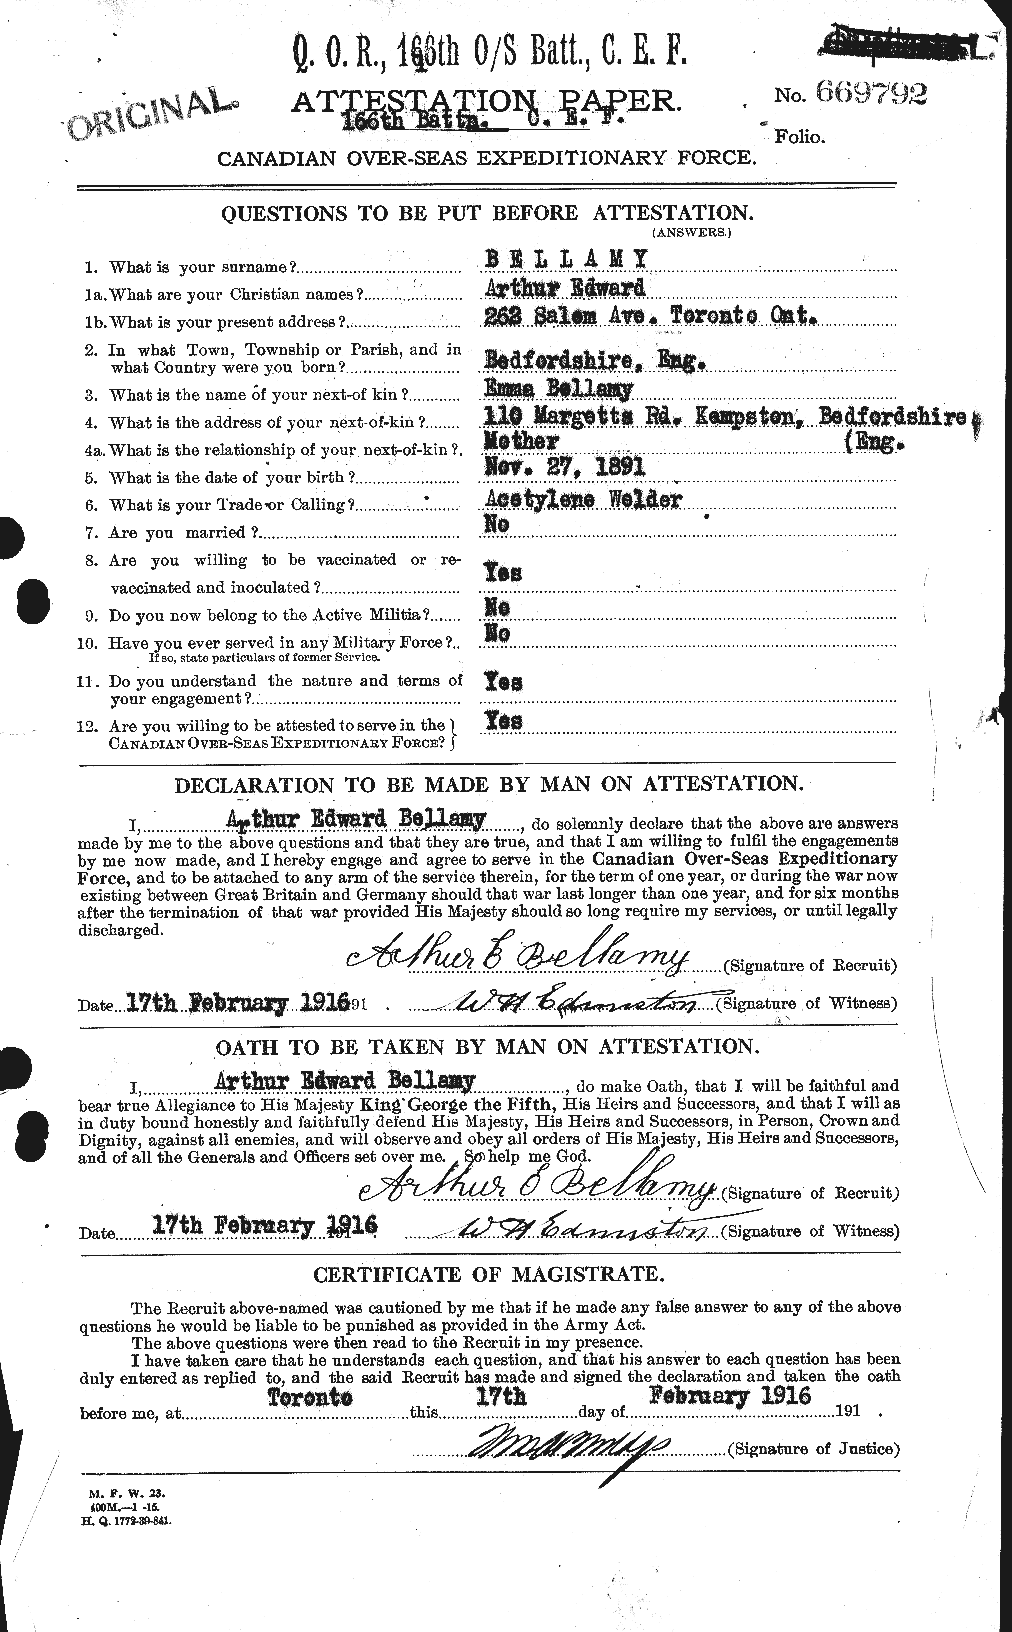 Personnel Records of the First World War - CEF 234965a